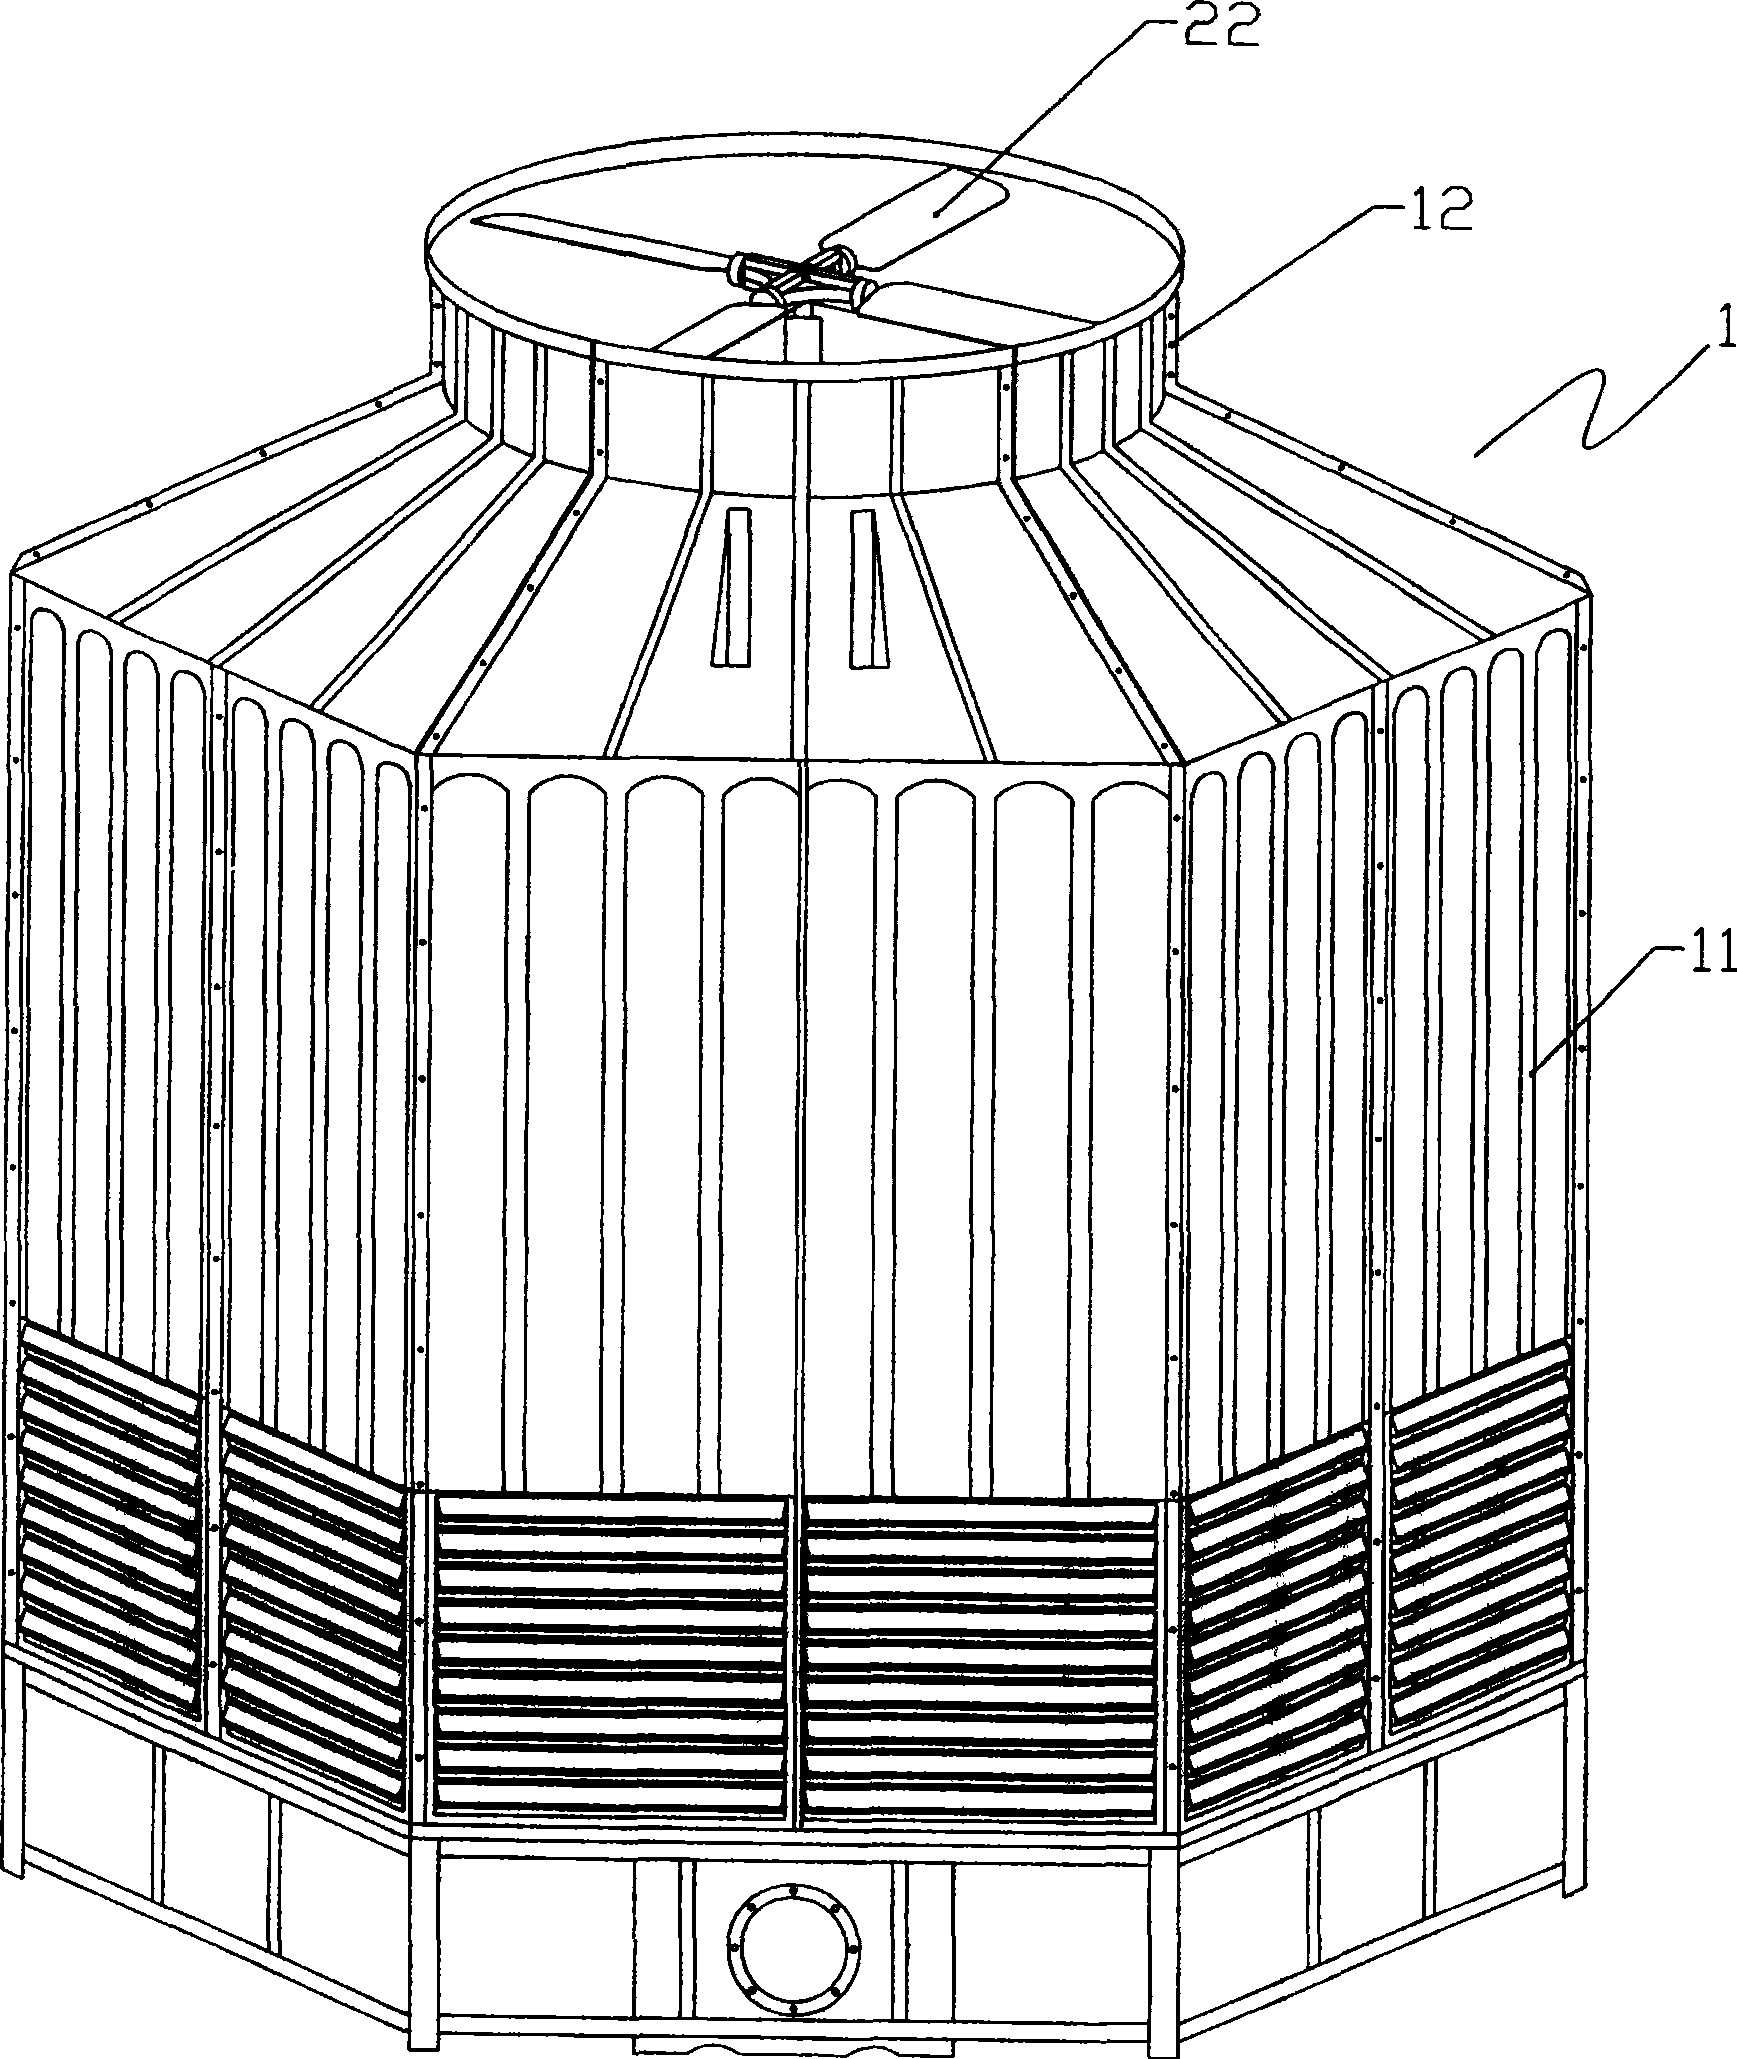 Polygonal counterflow type cooling tower